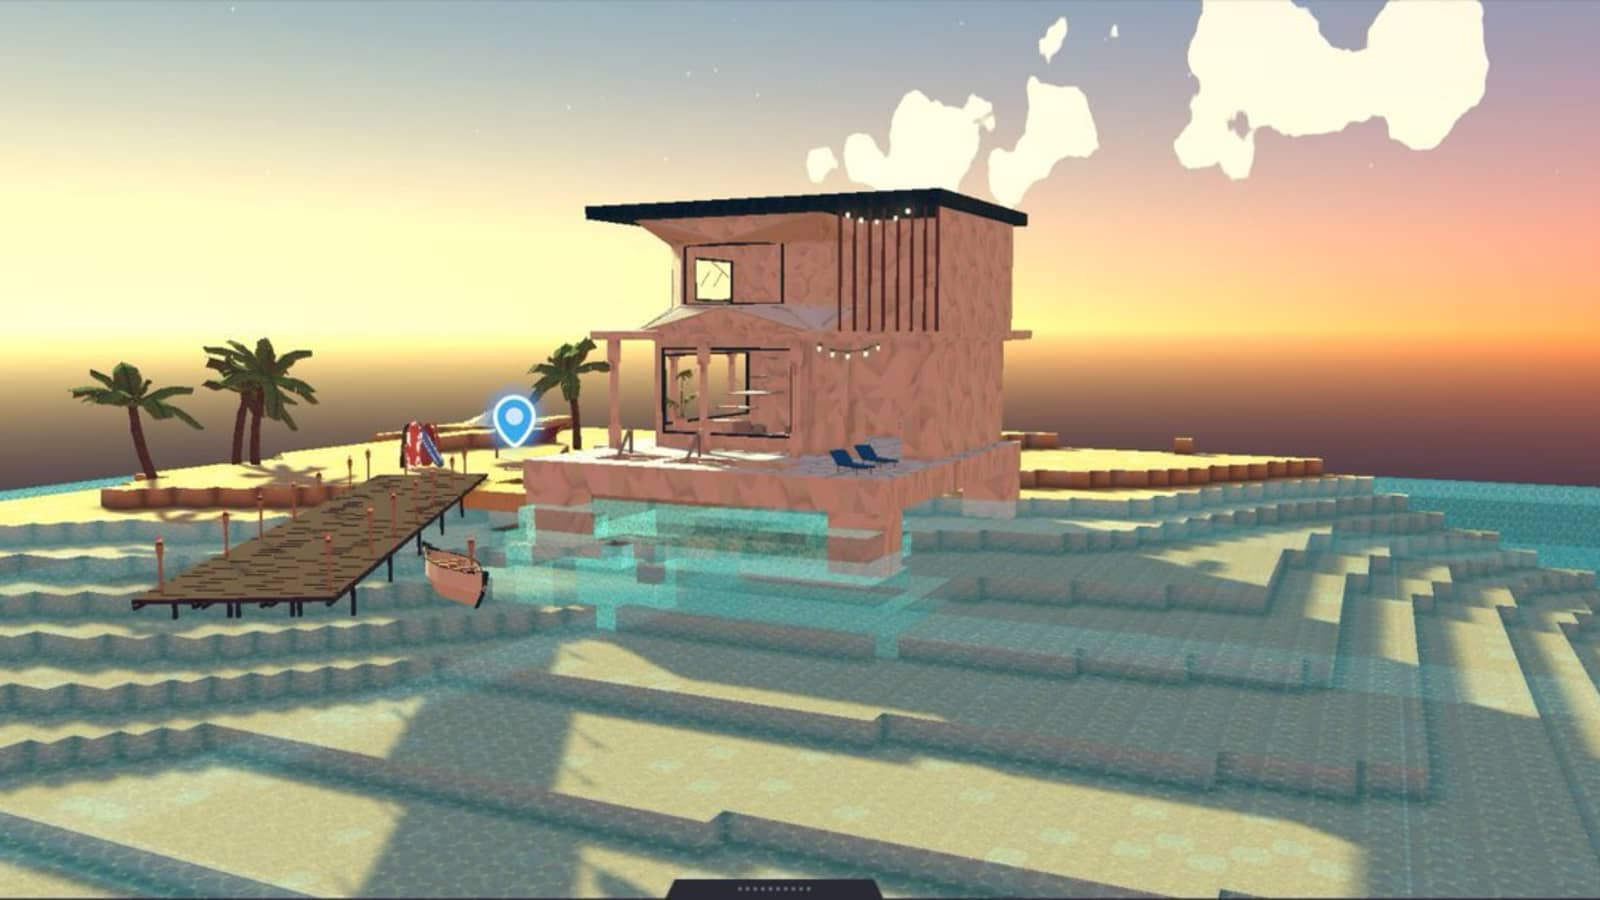 Screenshot of a plot of land created in the metaverse (CNBC)